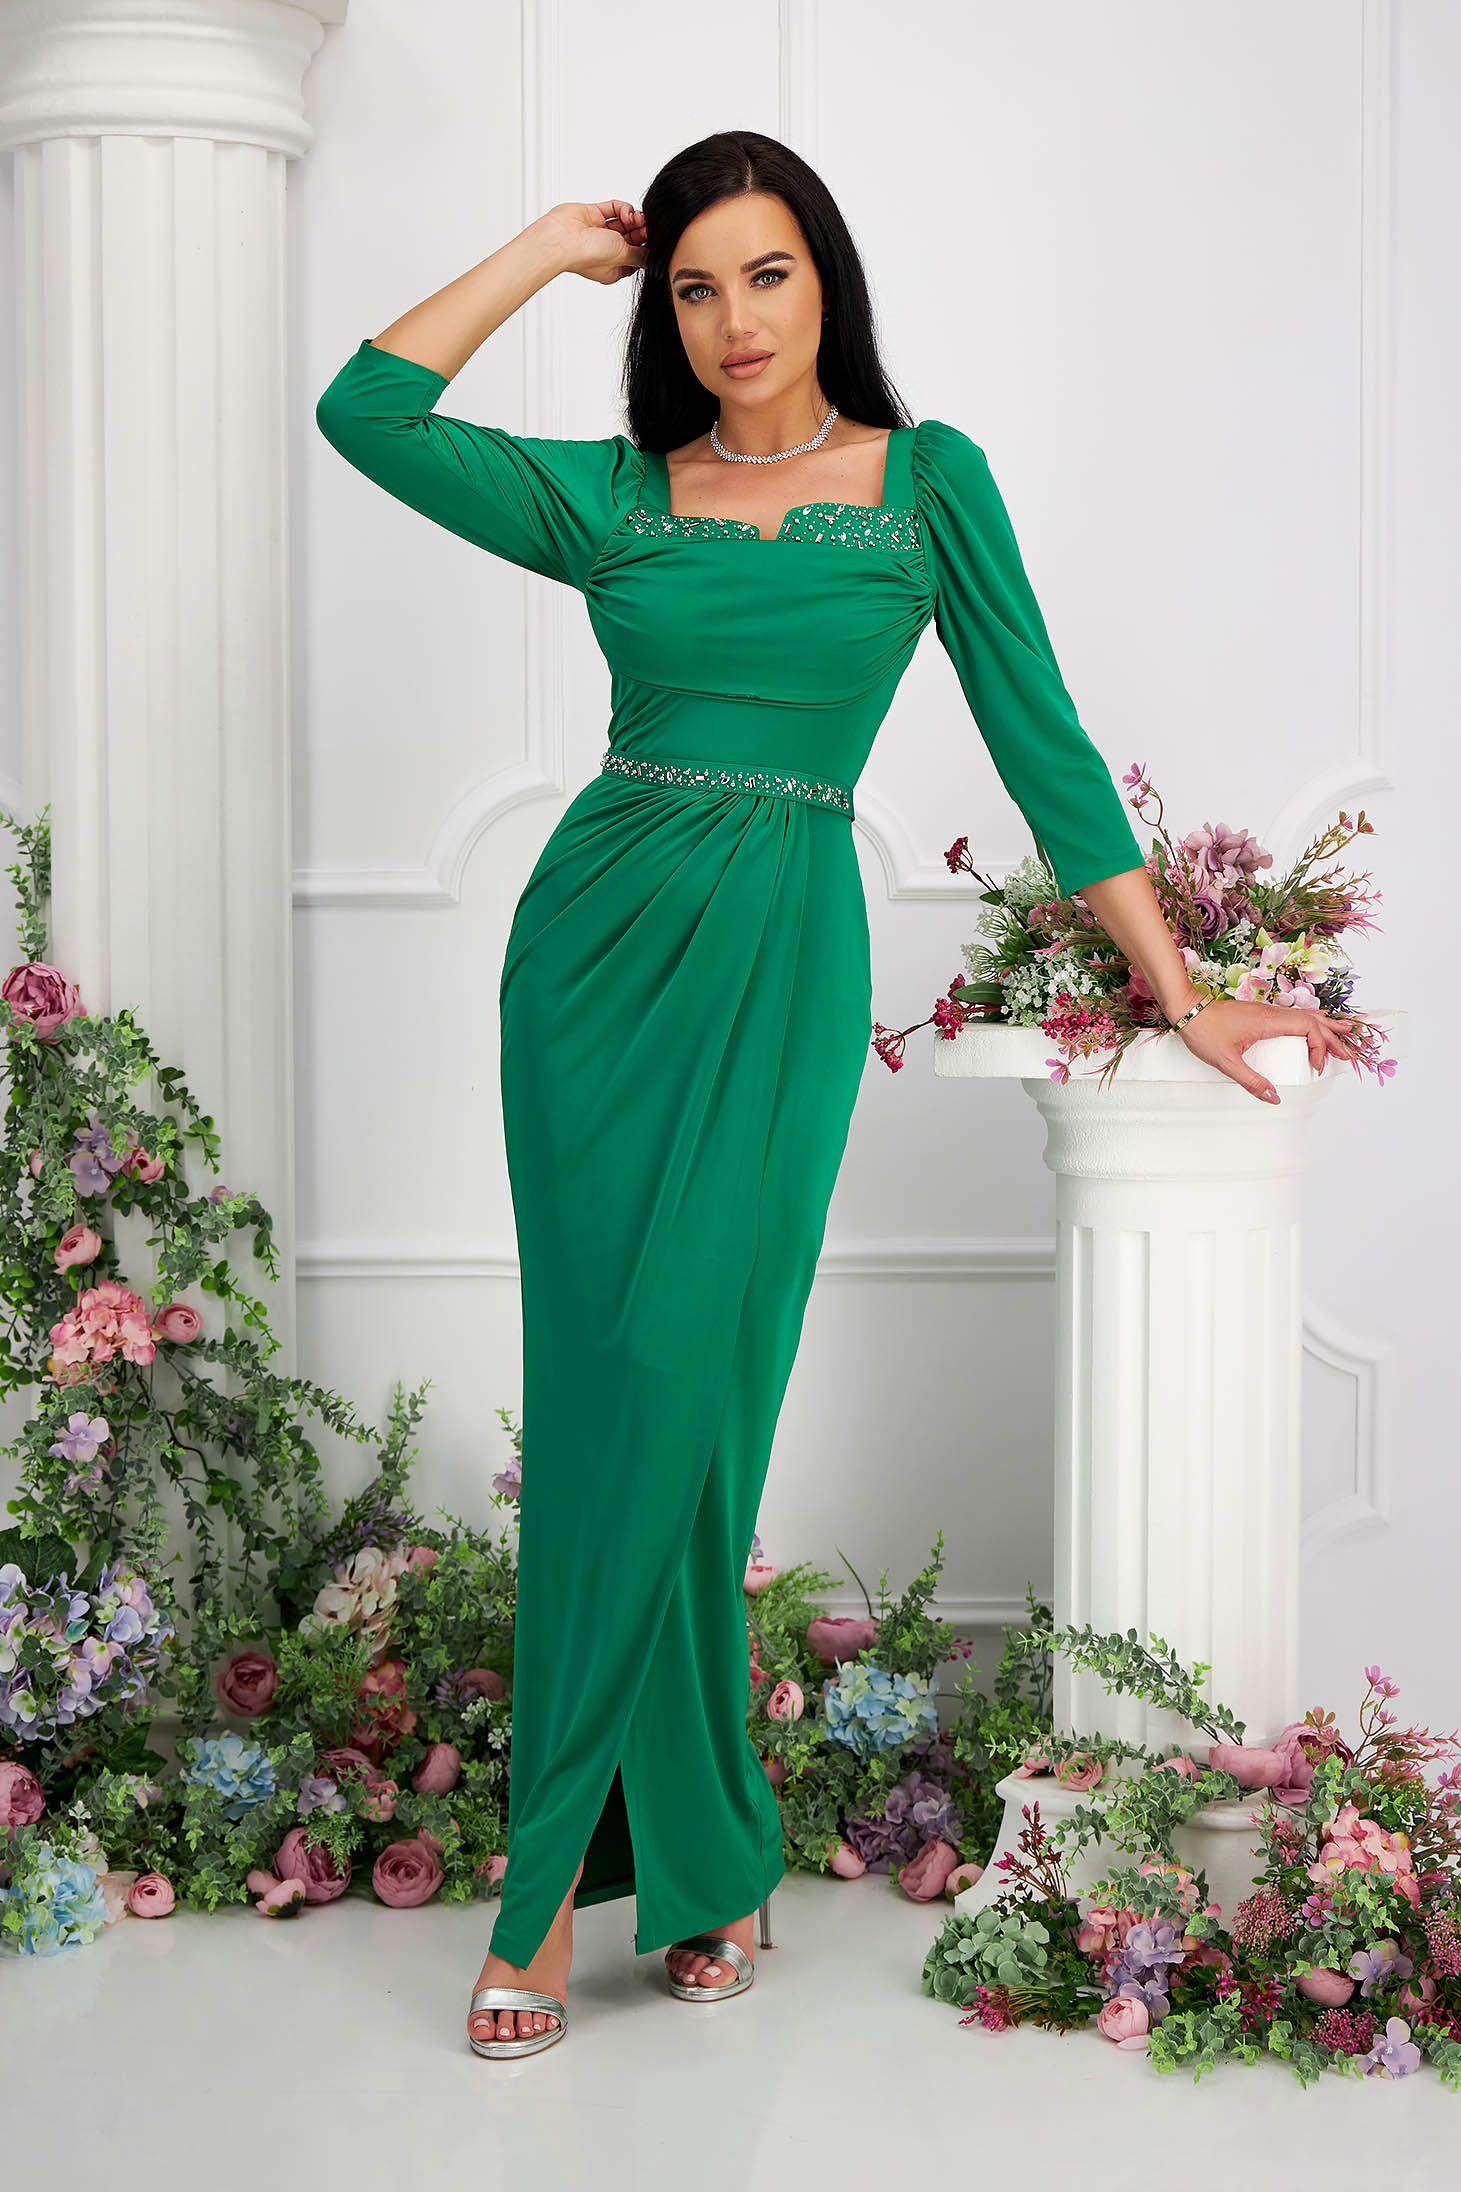 Green dress lycra long wrap around high shoulders accessorized with belt with crystal embellished details